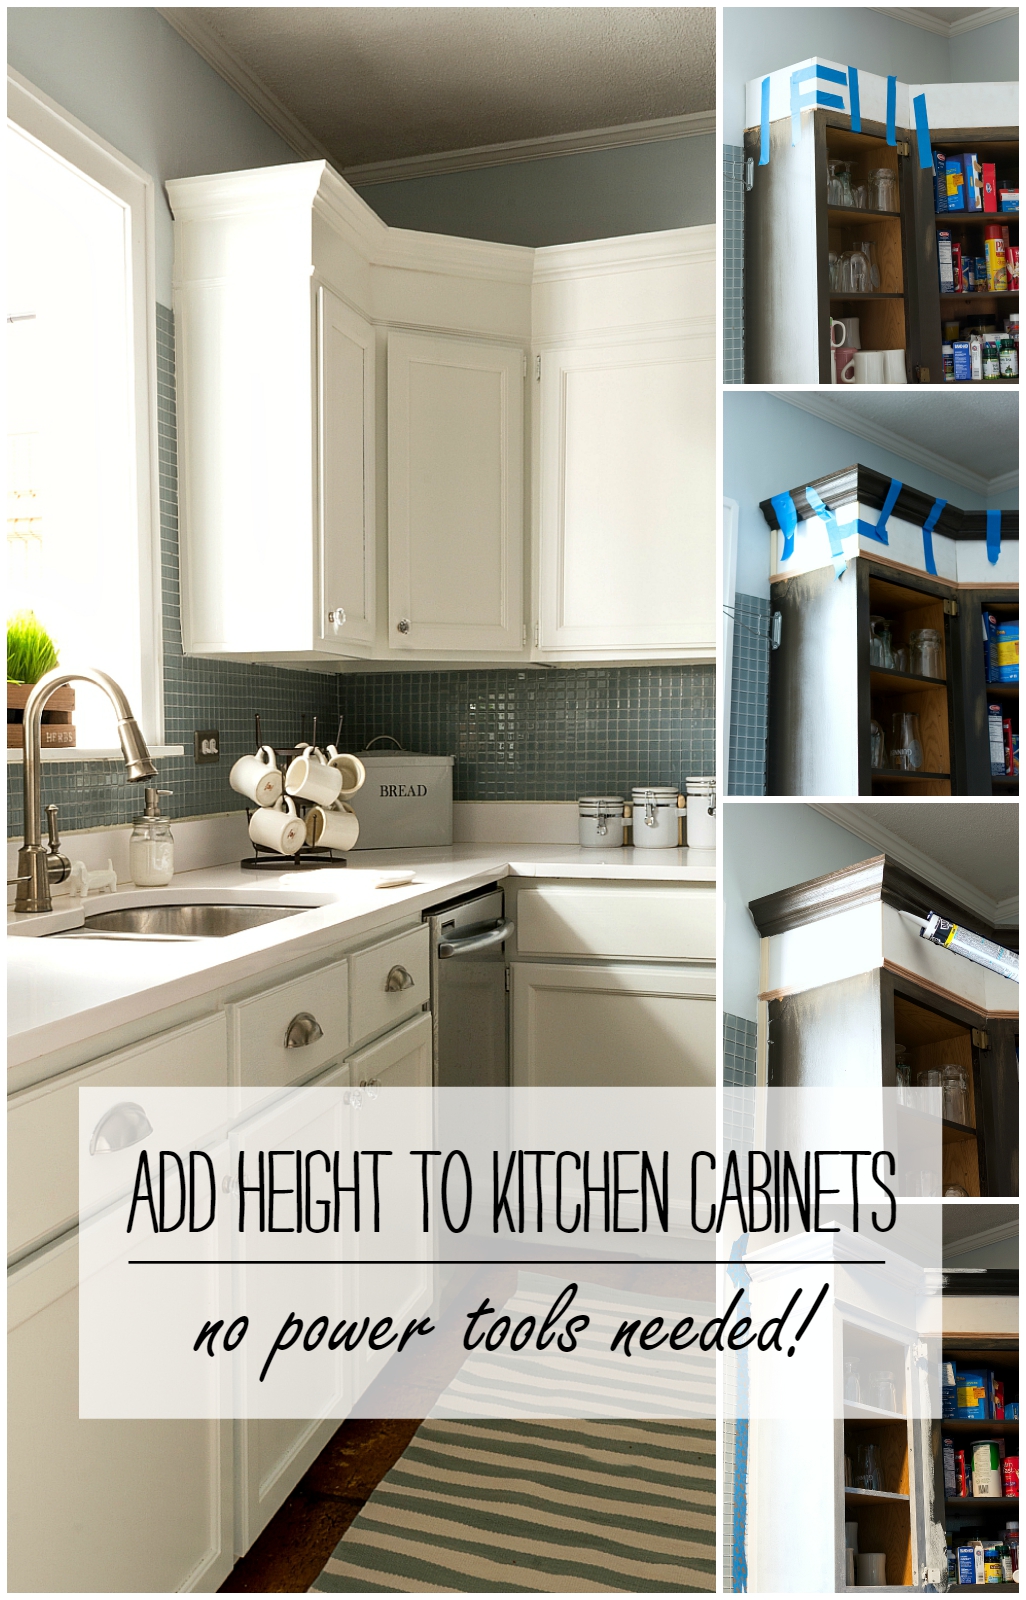 How To Add Height To Kitchen Cabinets - No Power Tools Needed